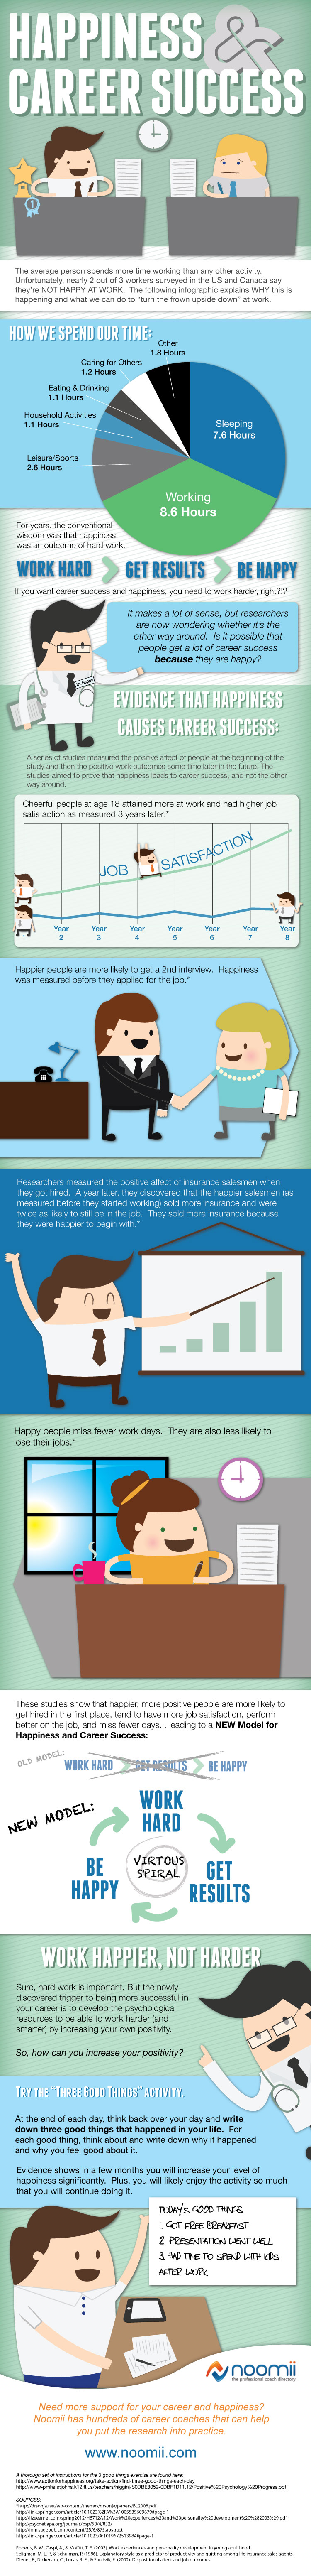 Study Shows To Reach Success Work Happier Not Harder [Infographic]